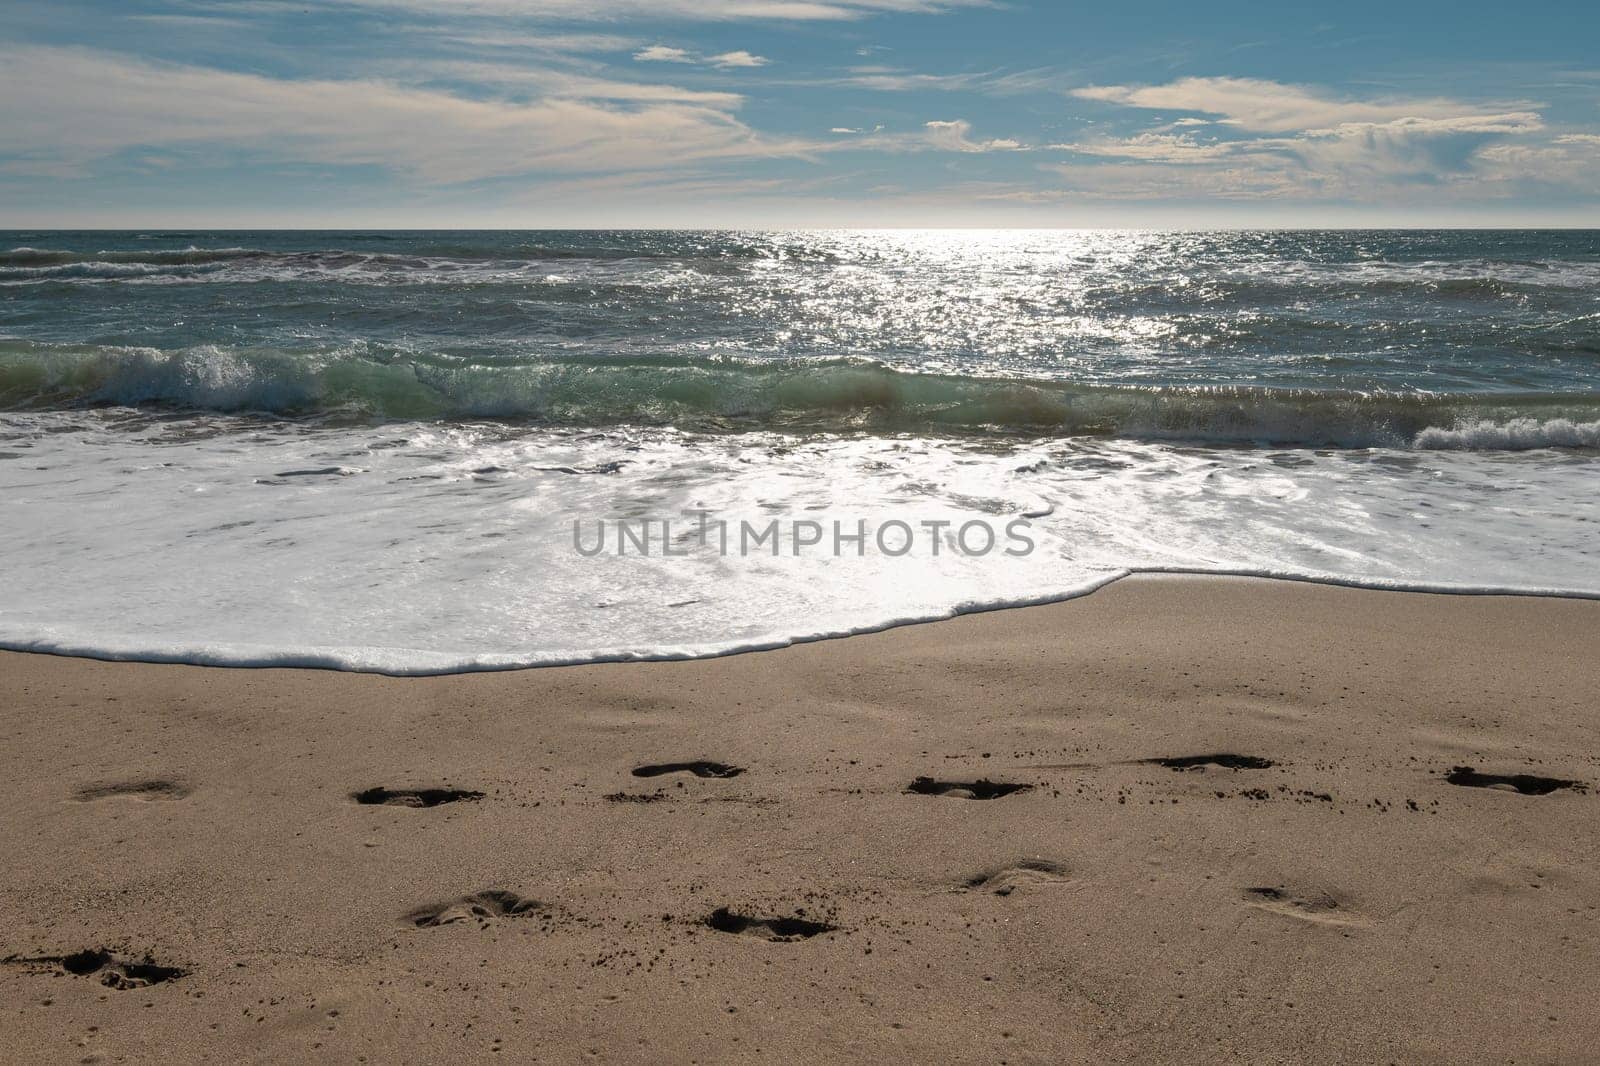 Footprints and Frothy Ocean Waves on Sandy Beach with Bright Sunlight Reflecting on Water by apavlin